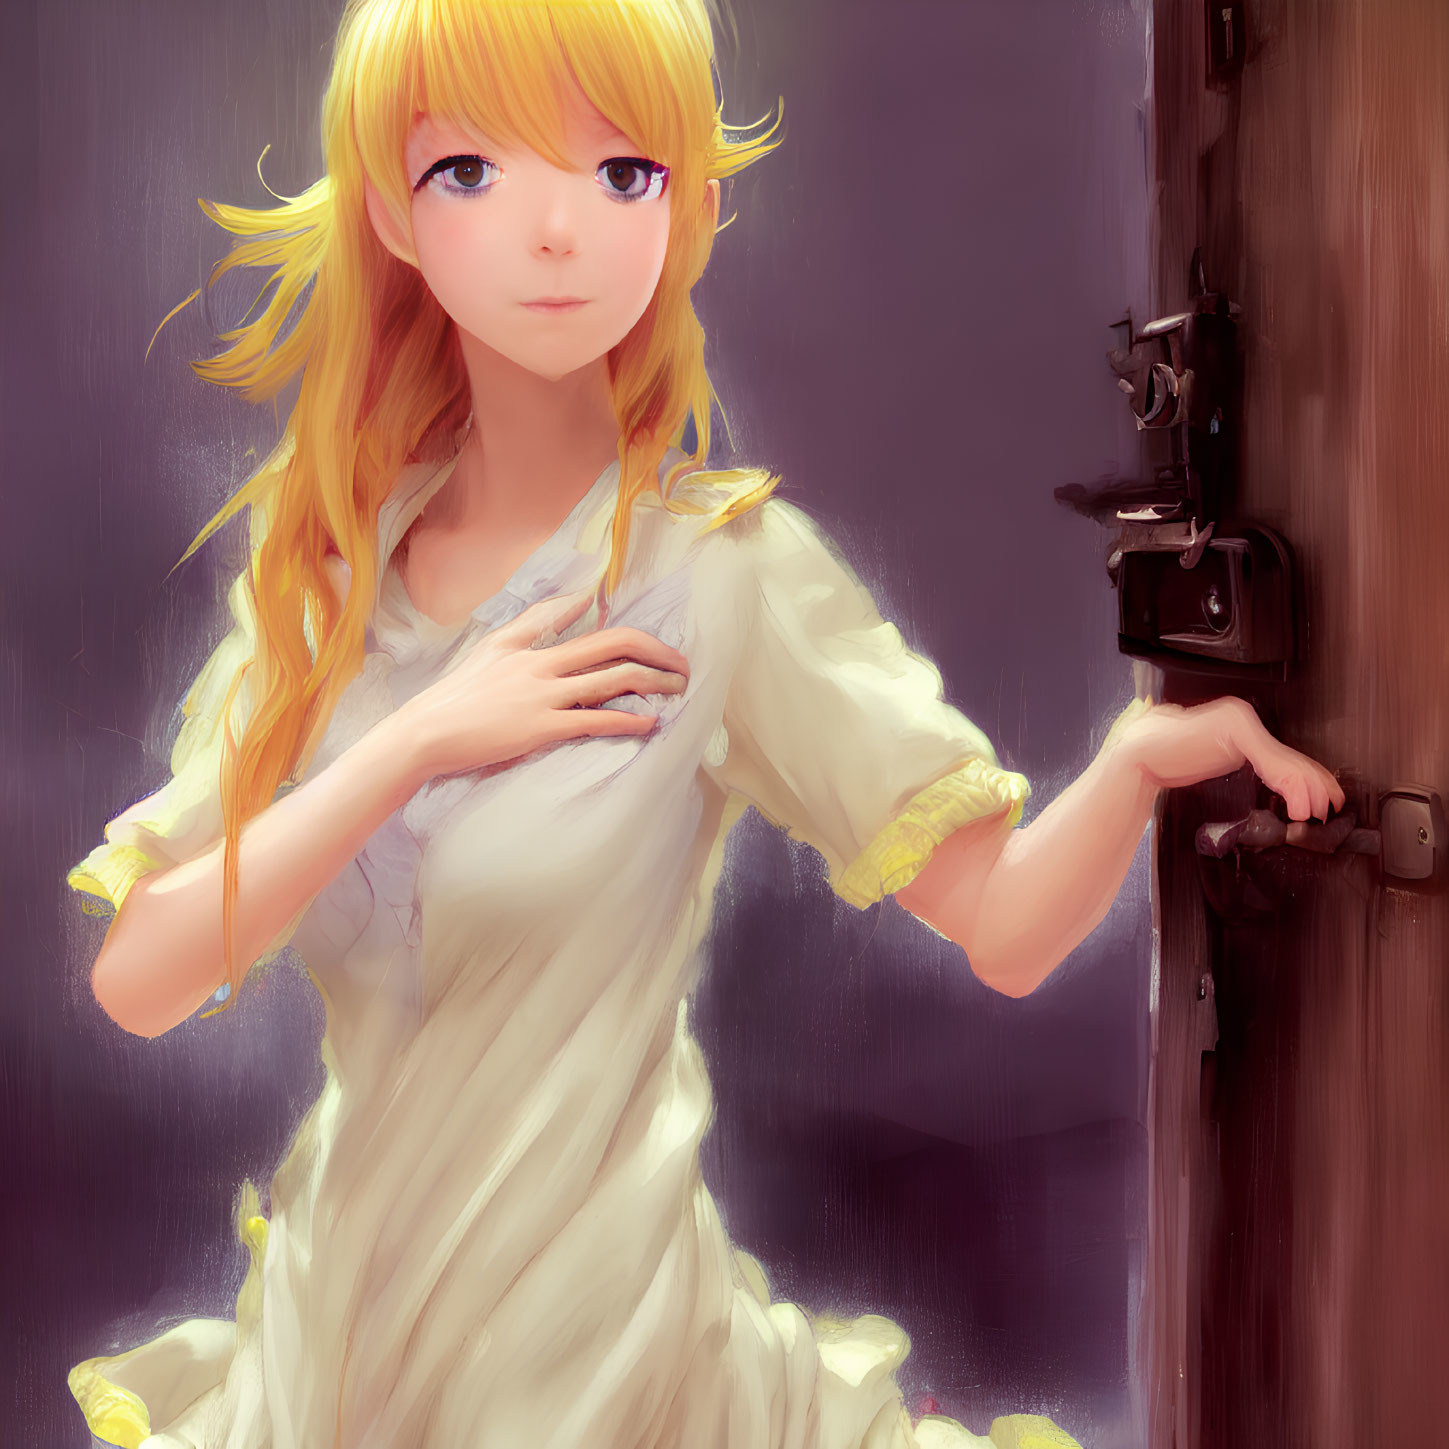 Blonde anime girl by wooden door in soft light with falling petals